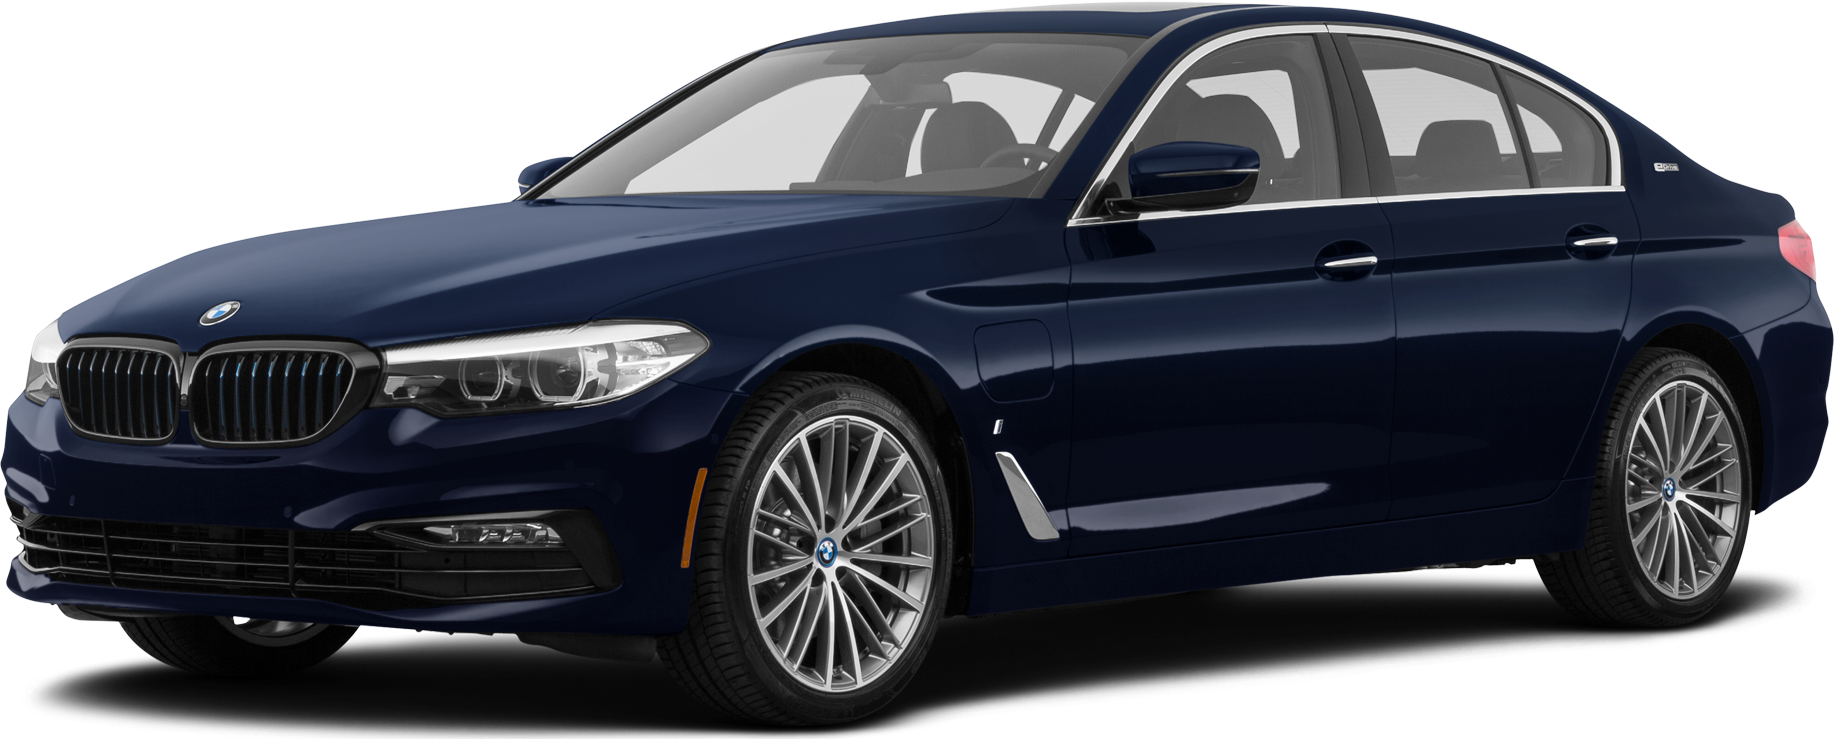 2018 BMW 5 Series Values & Cars for Sale | Kelley Blue Book